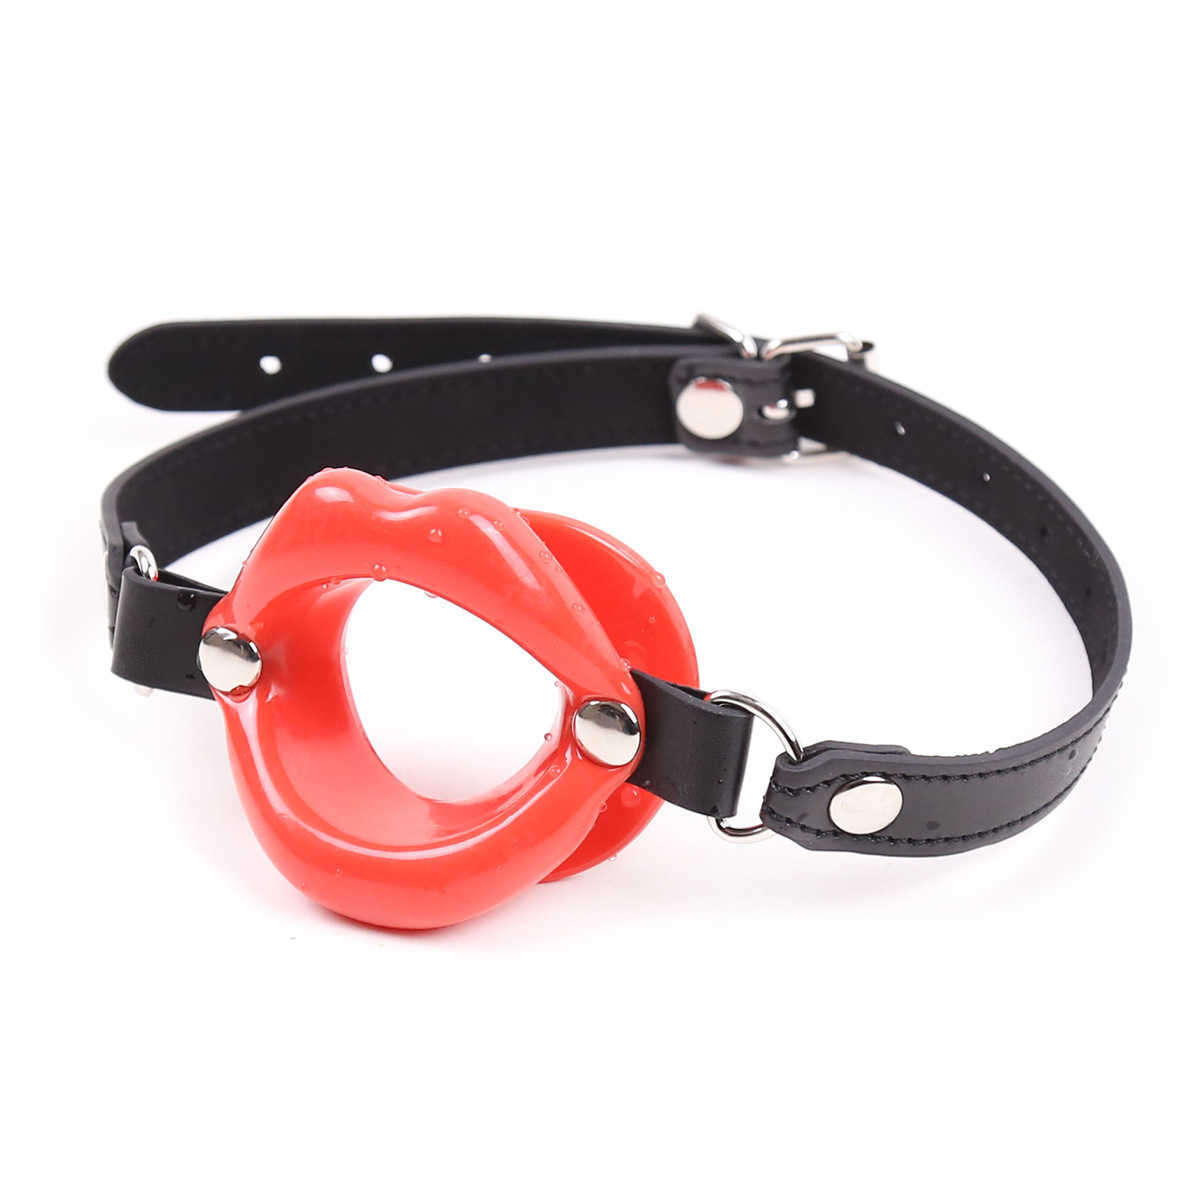 Massage Bdsm Leather Bondage Strap with Rubber Sexy Lip Oral Ball Mouth Gag Sex Toys for Men Women Fetish Slave Flirt Over 18 Years Old